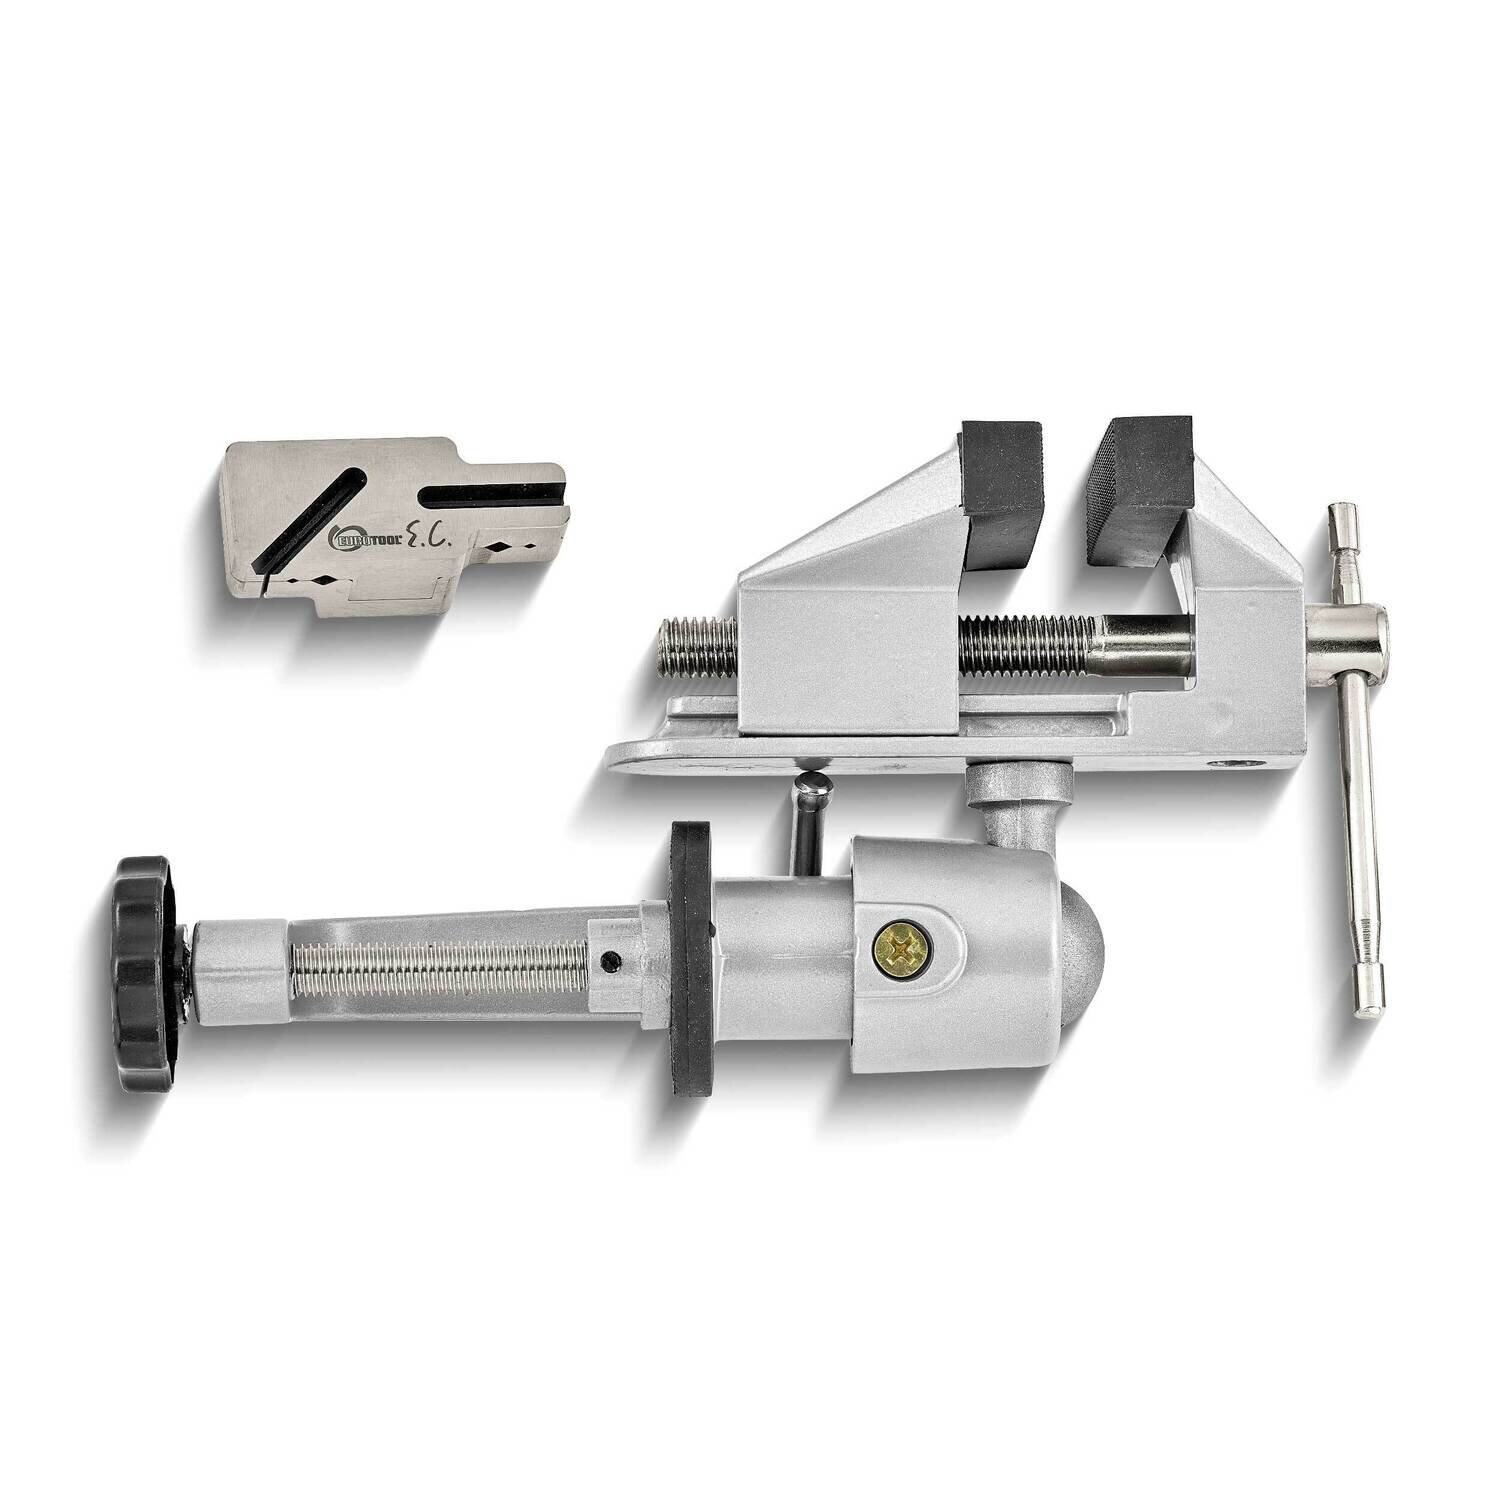 Multi-Angle Cutting Jig with Swivel Vise JT5474SET